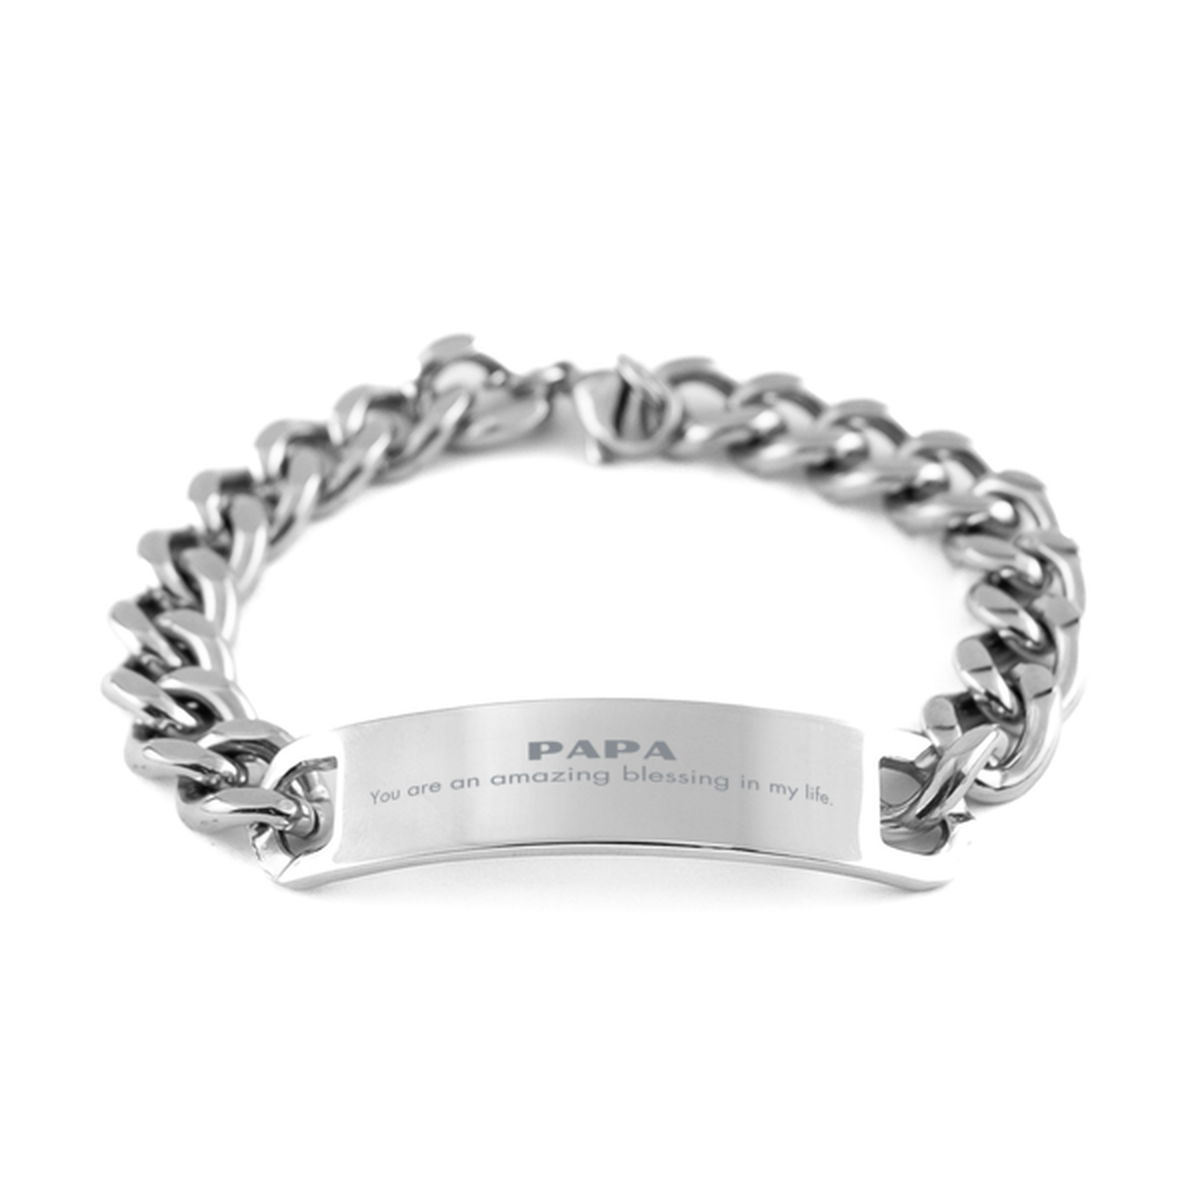 Papa Cuban Chain Stainless Steel Bracelet, You are an amazing blessing in my life, Thank You Gifts For Papa, Inspirational Birthday Christmas Unique Gifts For Papa